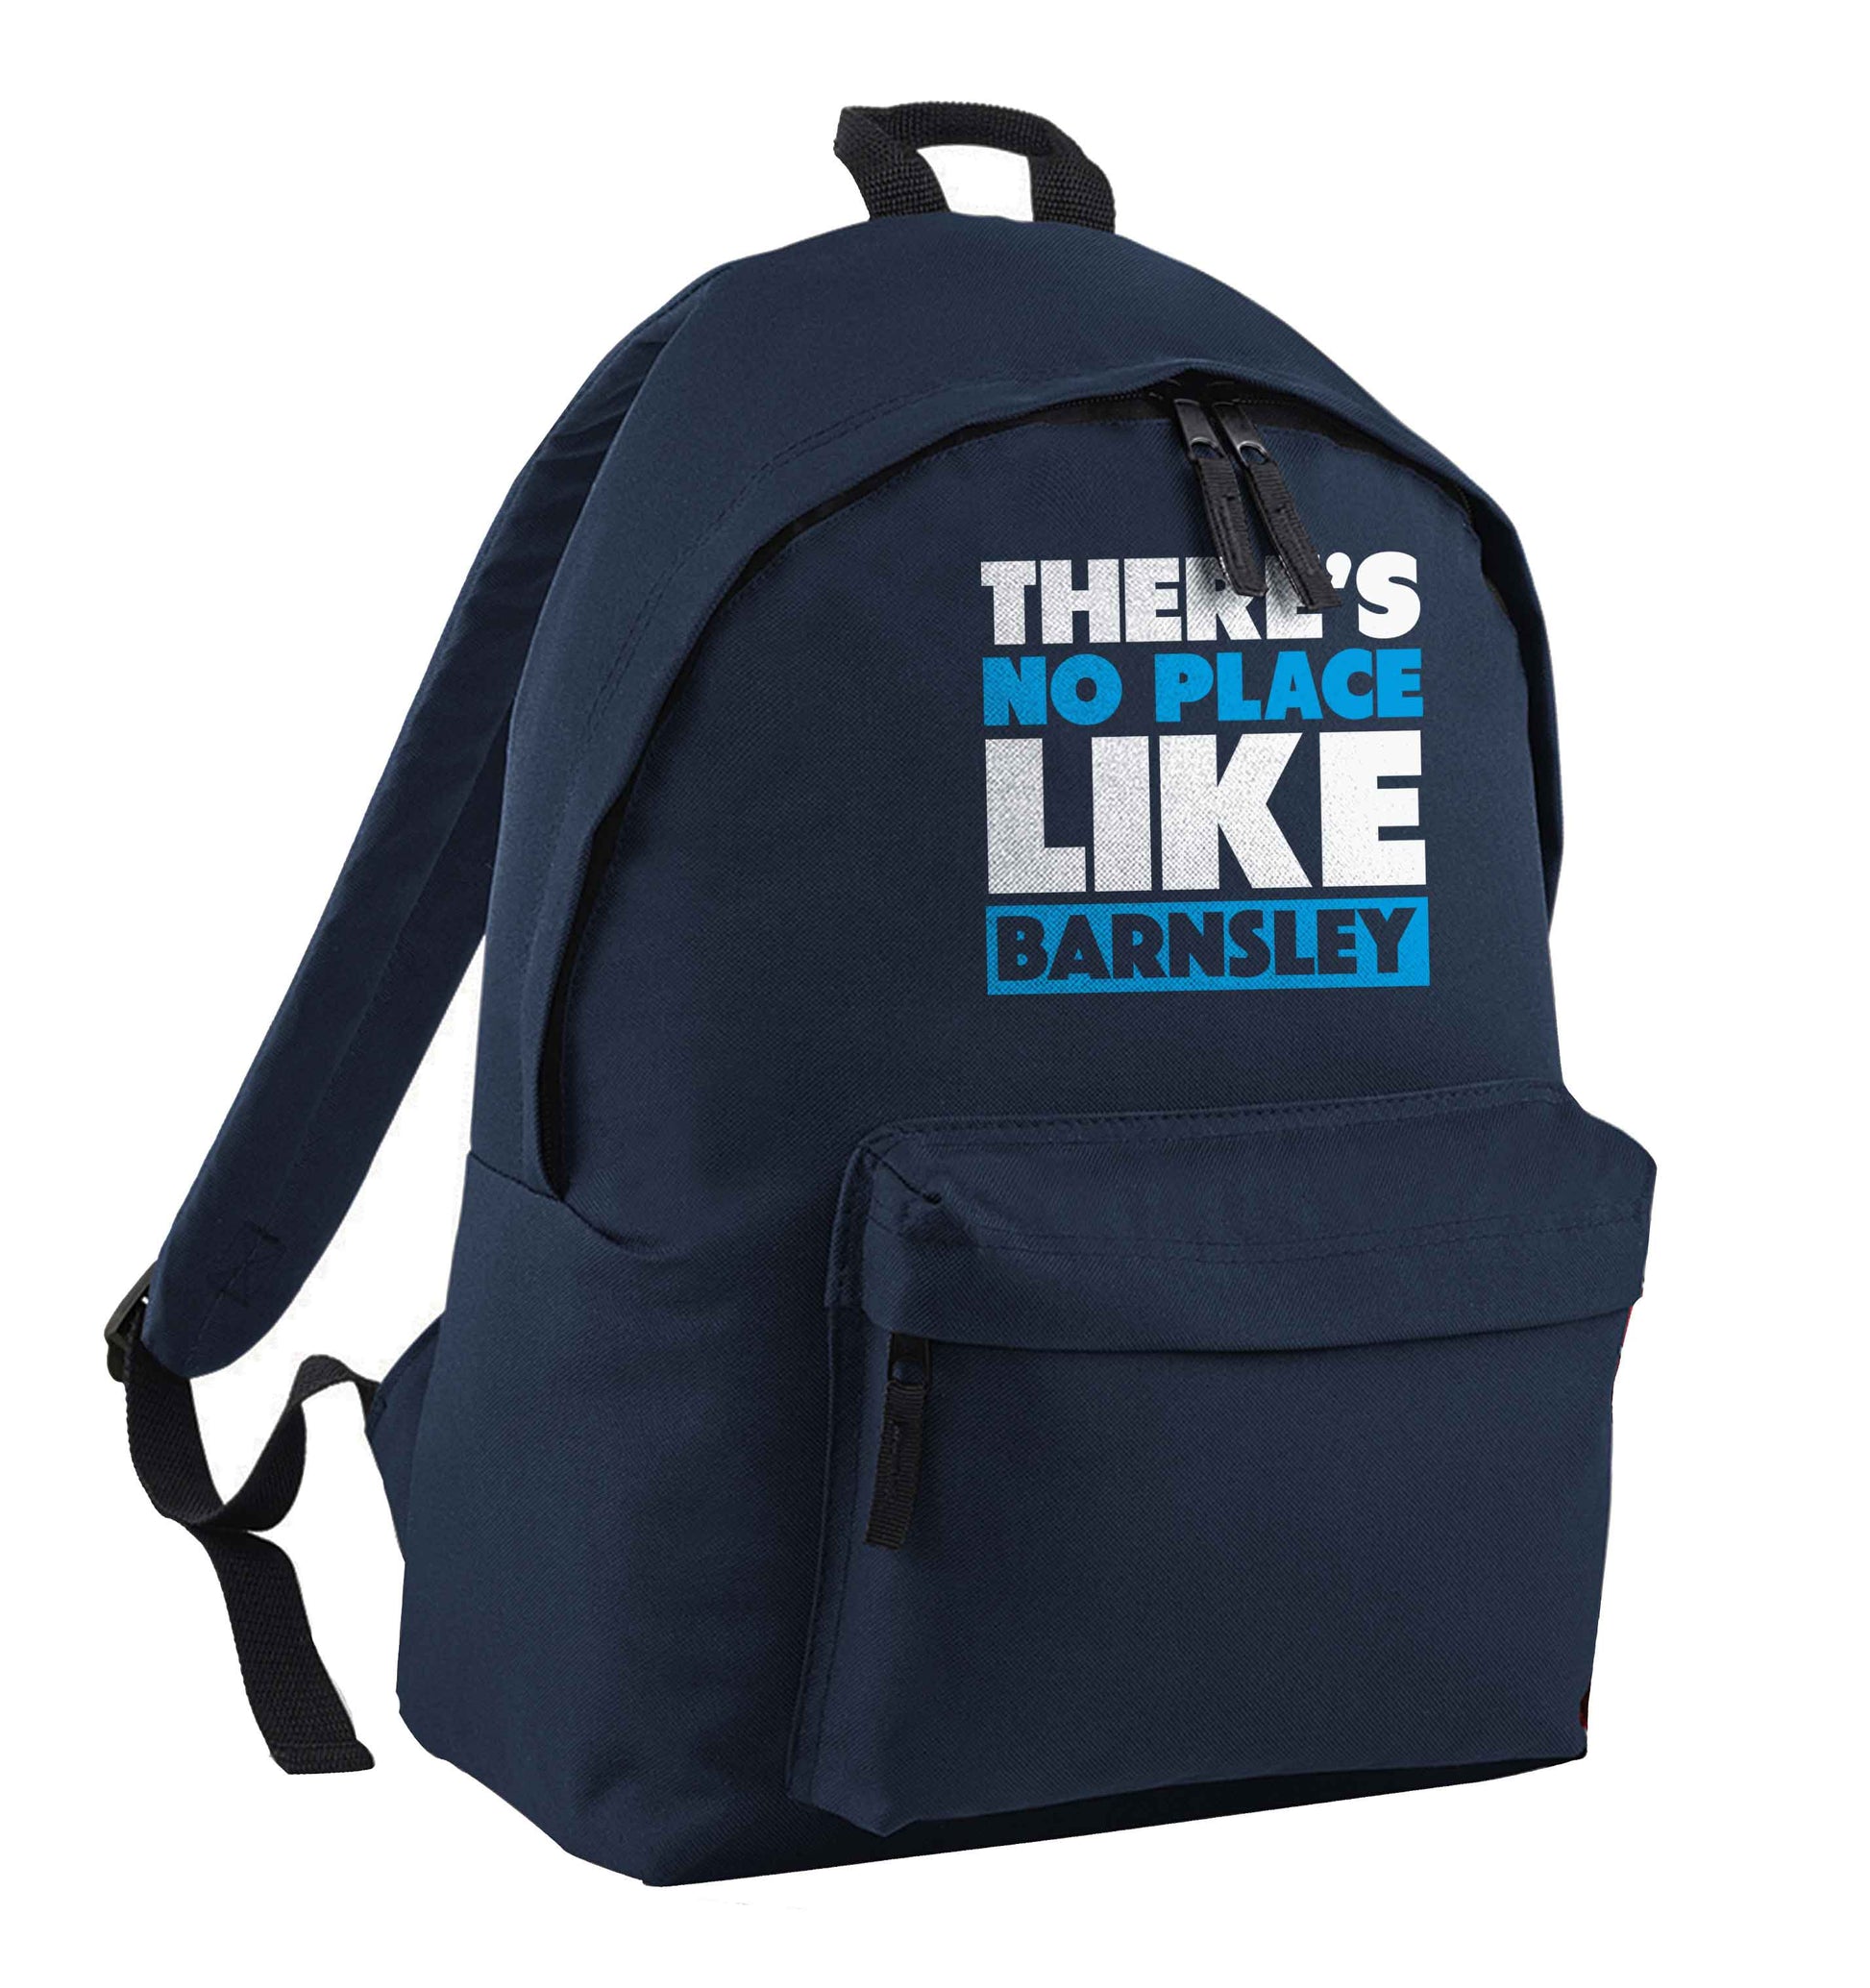 There's No Place Like Barnsley navy children's backpack